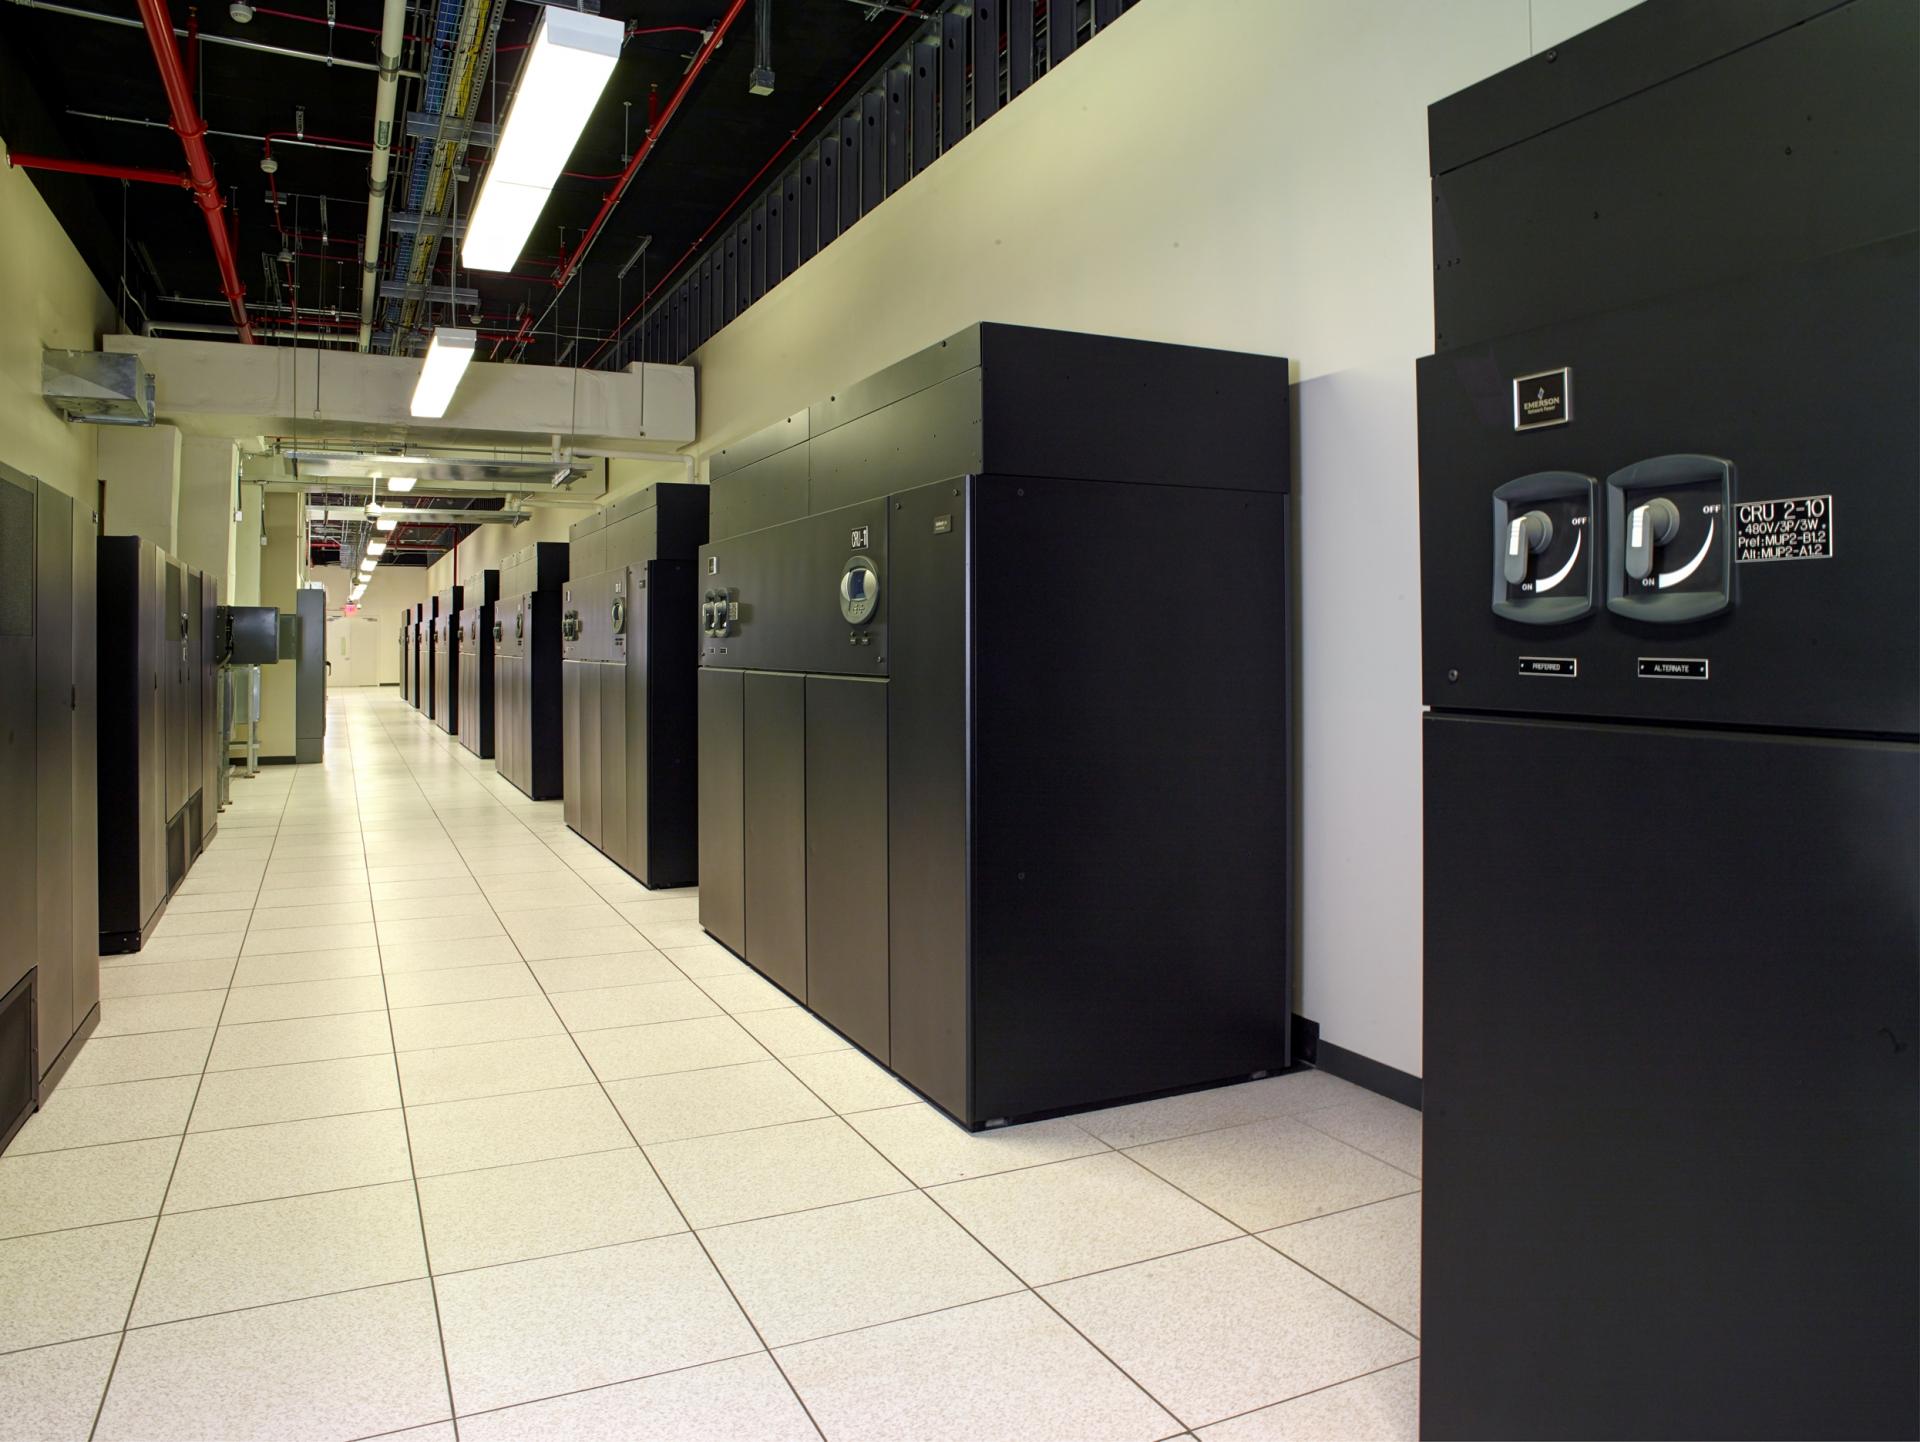 Mechanical and electric service gallery surrounds the data center white space